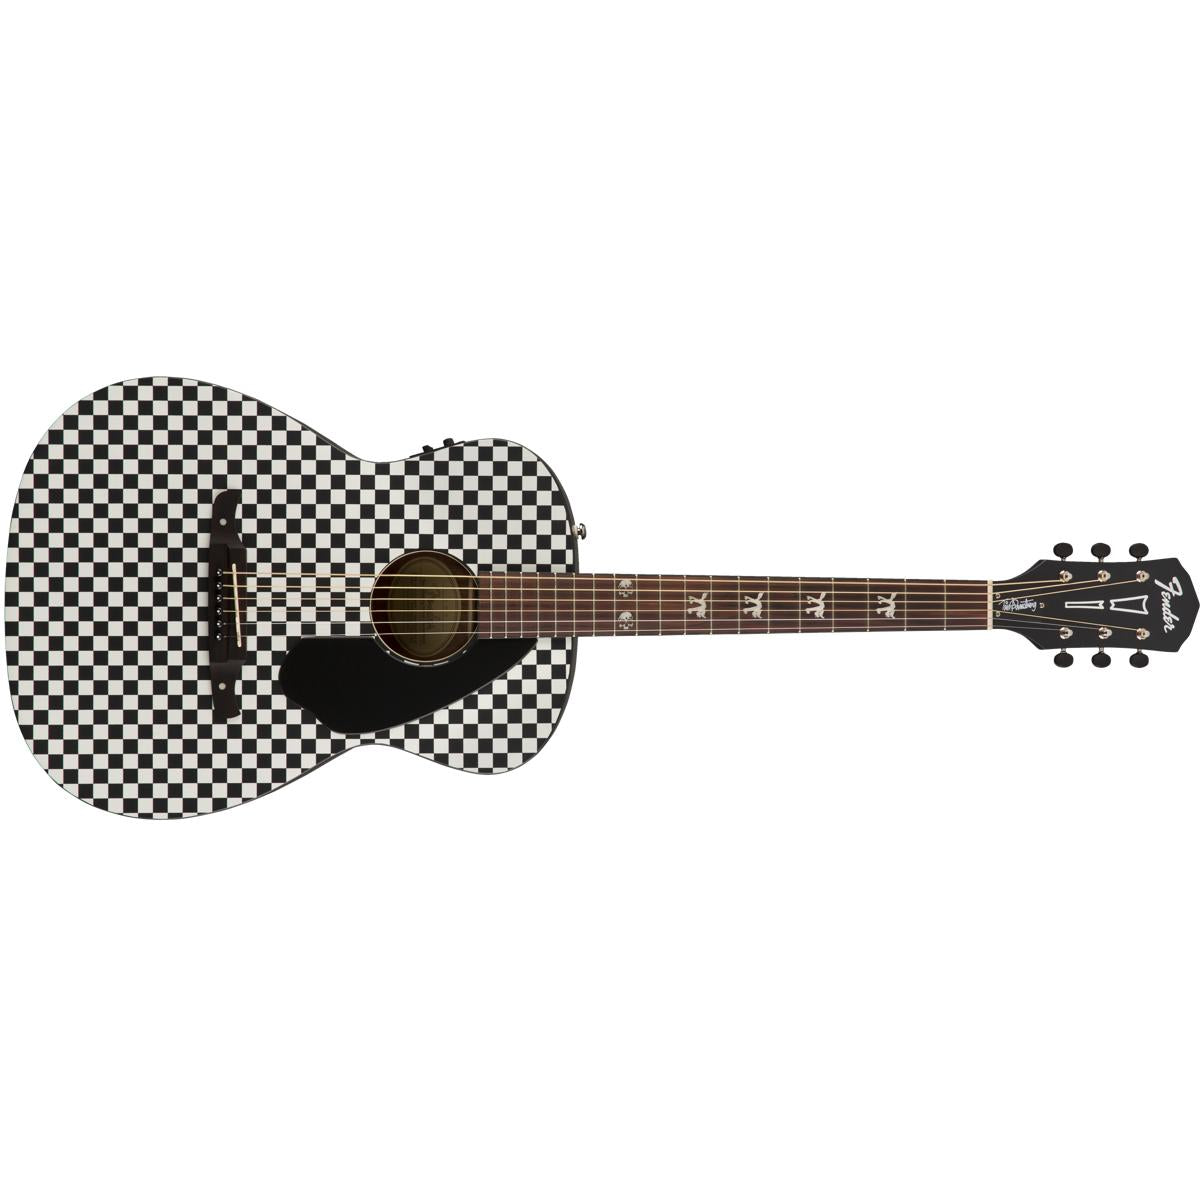 Fender FSR Tim Armstrong Hellcat Acoustic Guitar Checkerboard w/ Pickup - 0971752088